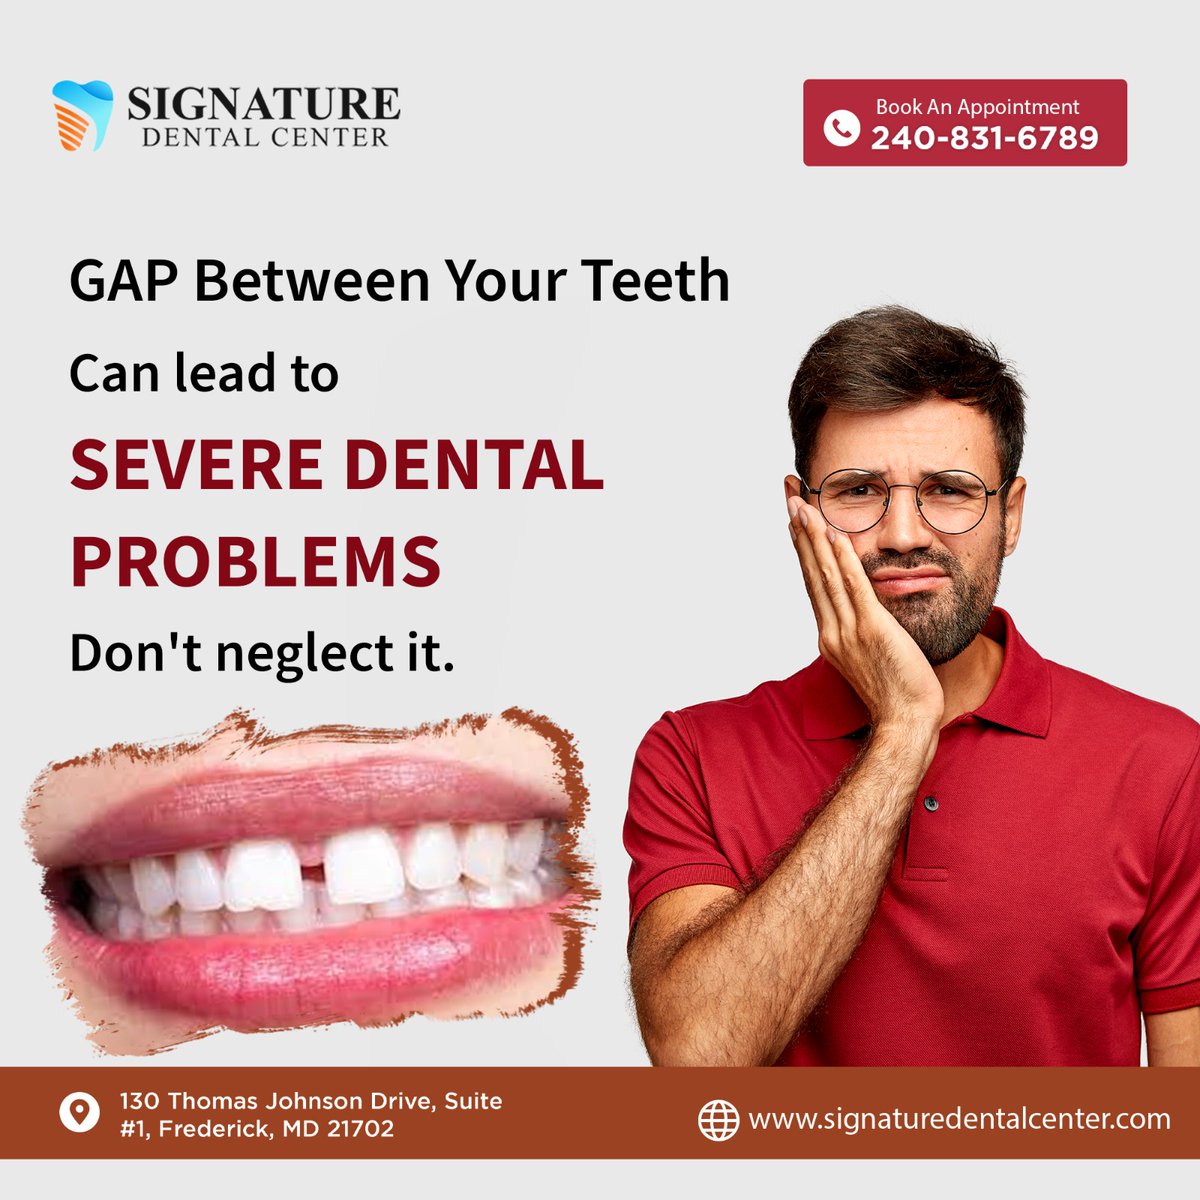 Embrace your unique smile! Don't let a gap hold you back. Book your consultation today and let's close the gap together!
.
For appointments, call or text: +1240-831-6789
Or Visit: signaturedentalcenter.com
.
.
#Dentaltreatment #toothextraction #teethwhitening 
#straighteningteeth